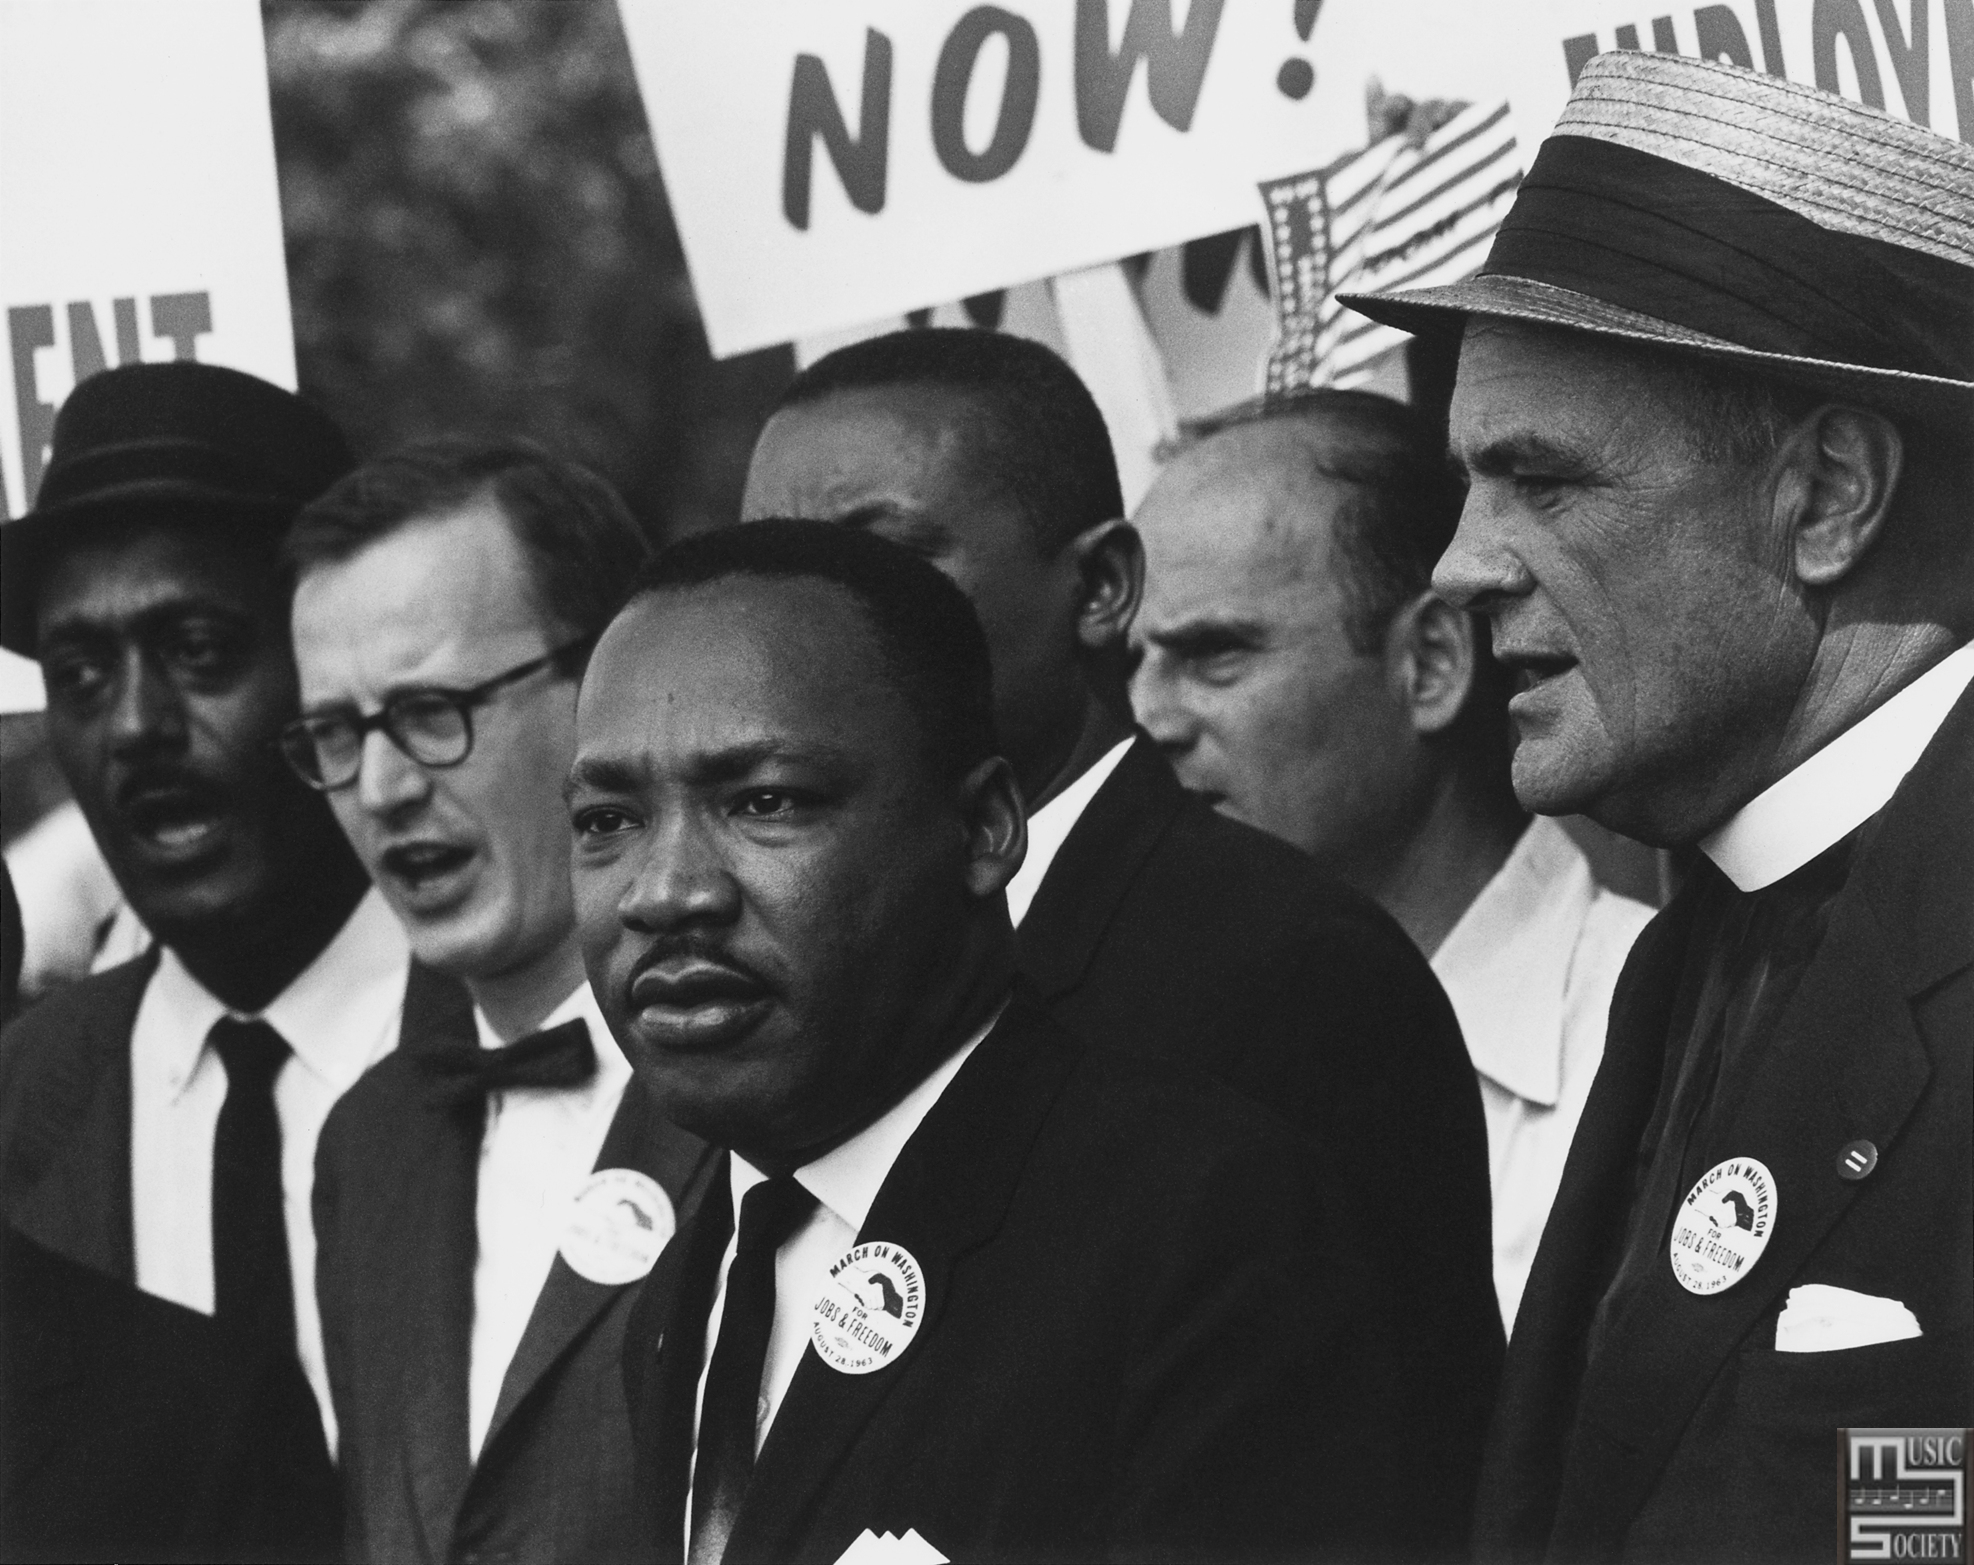 Civil_Rights_March_on_Washington,_D.C._(Dr._Martin_Luther_King,_Jr._and_Mathew_Ahmann_in_a_crowd.)_-_NARA_-_542015_-_Restoration